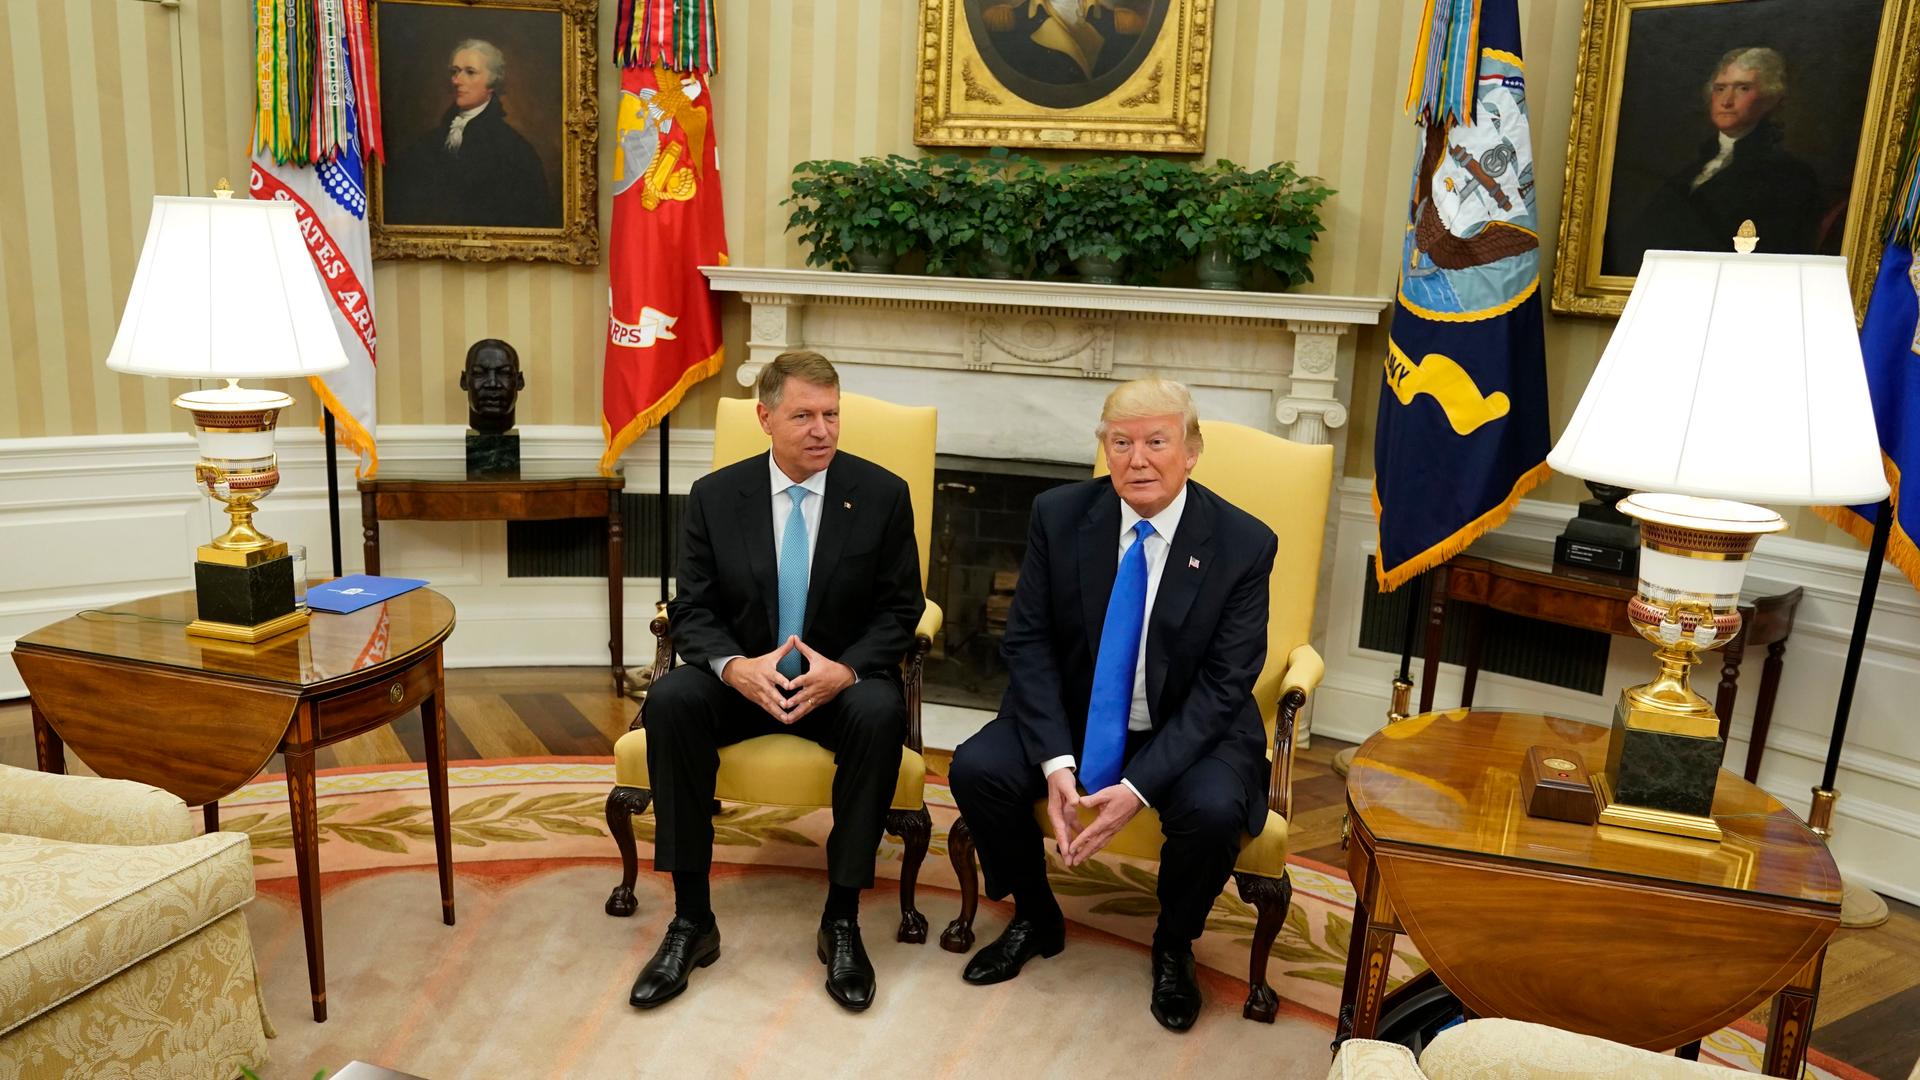 President Donald Trump (R) meets with Romanian President Klaus Iohannis